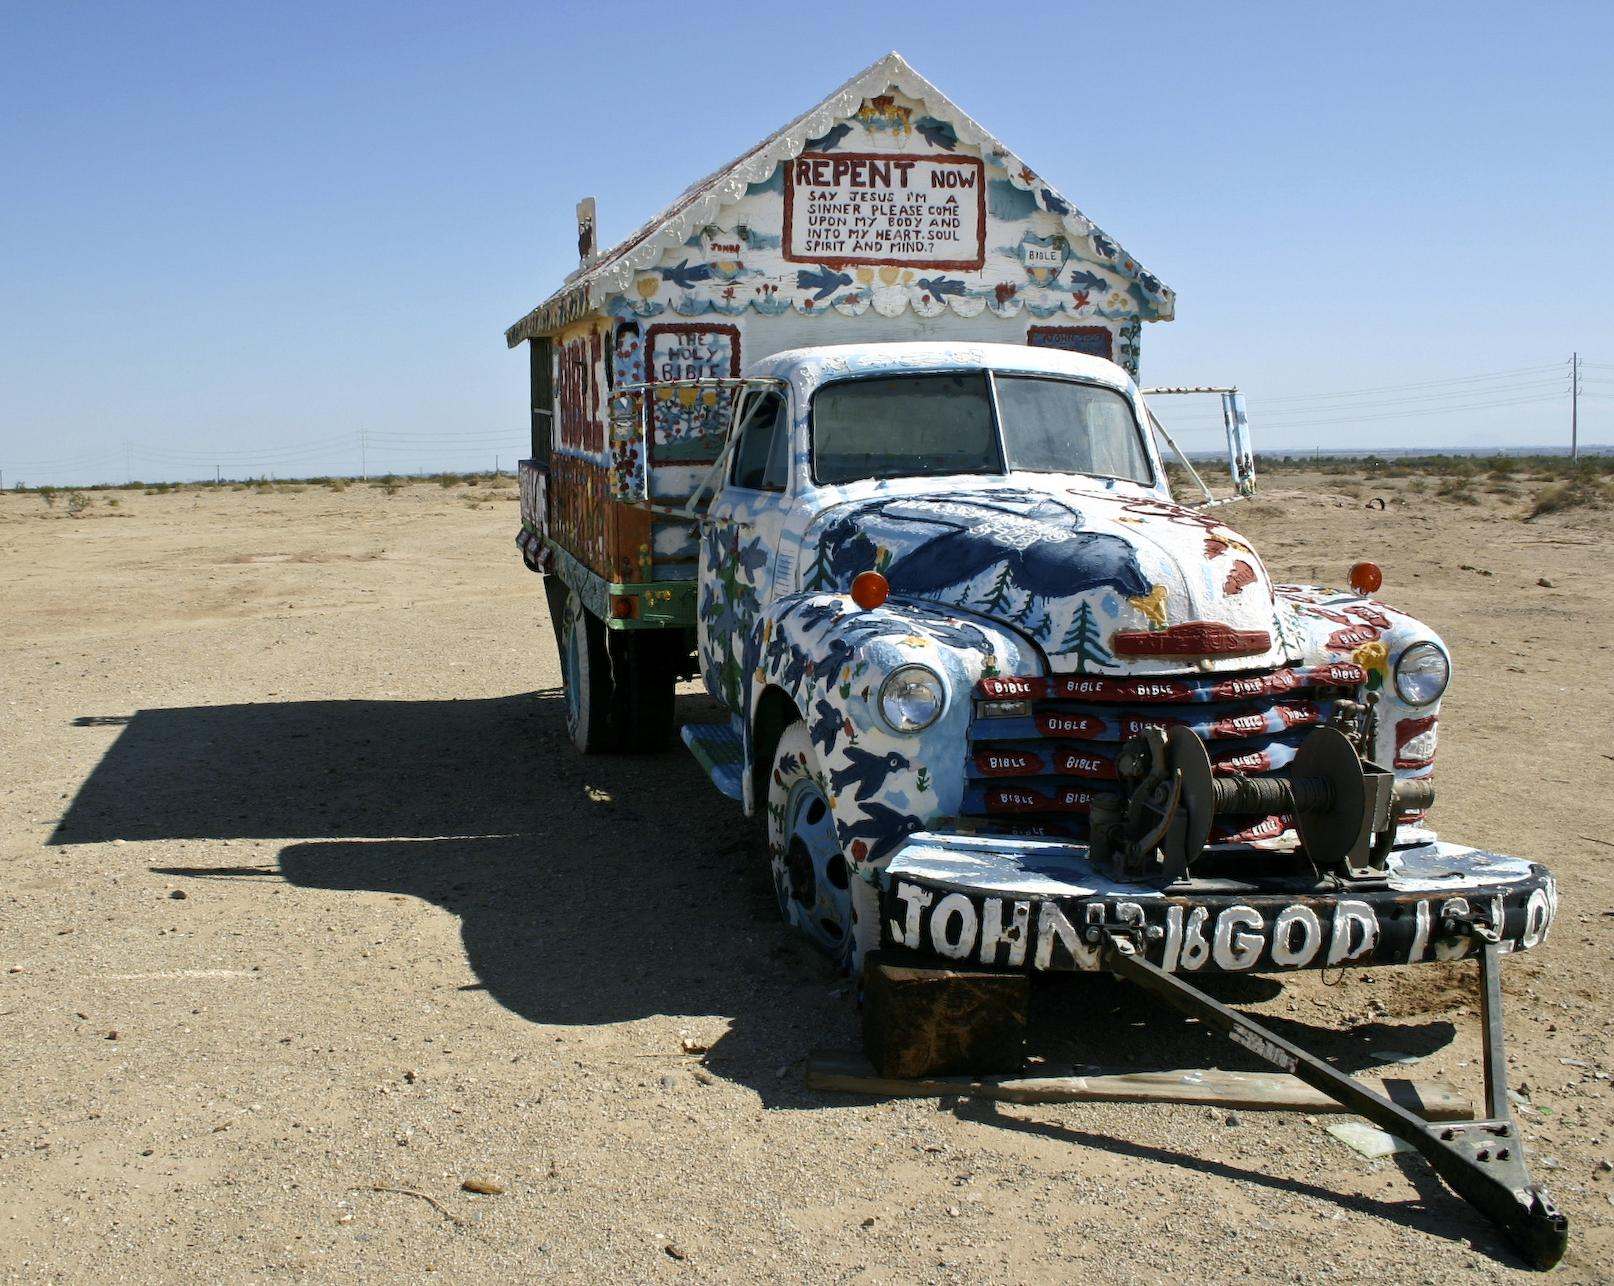 salvation mountain6 Truly Unique Salvation Mountain in California